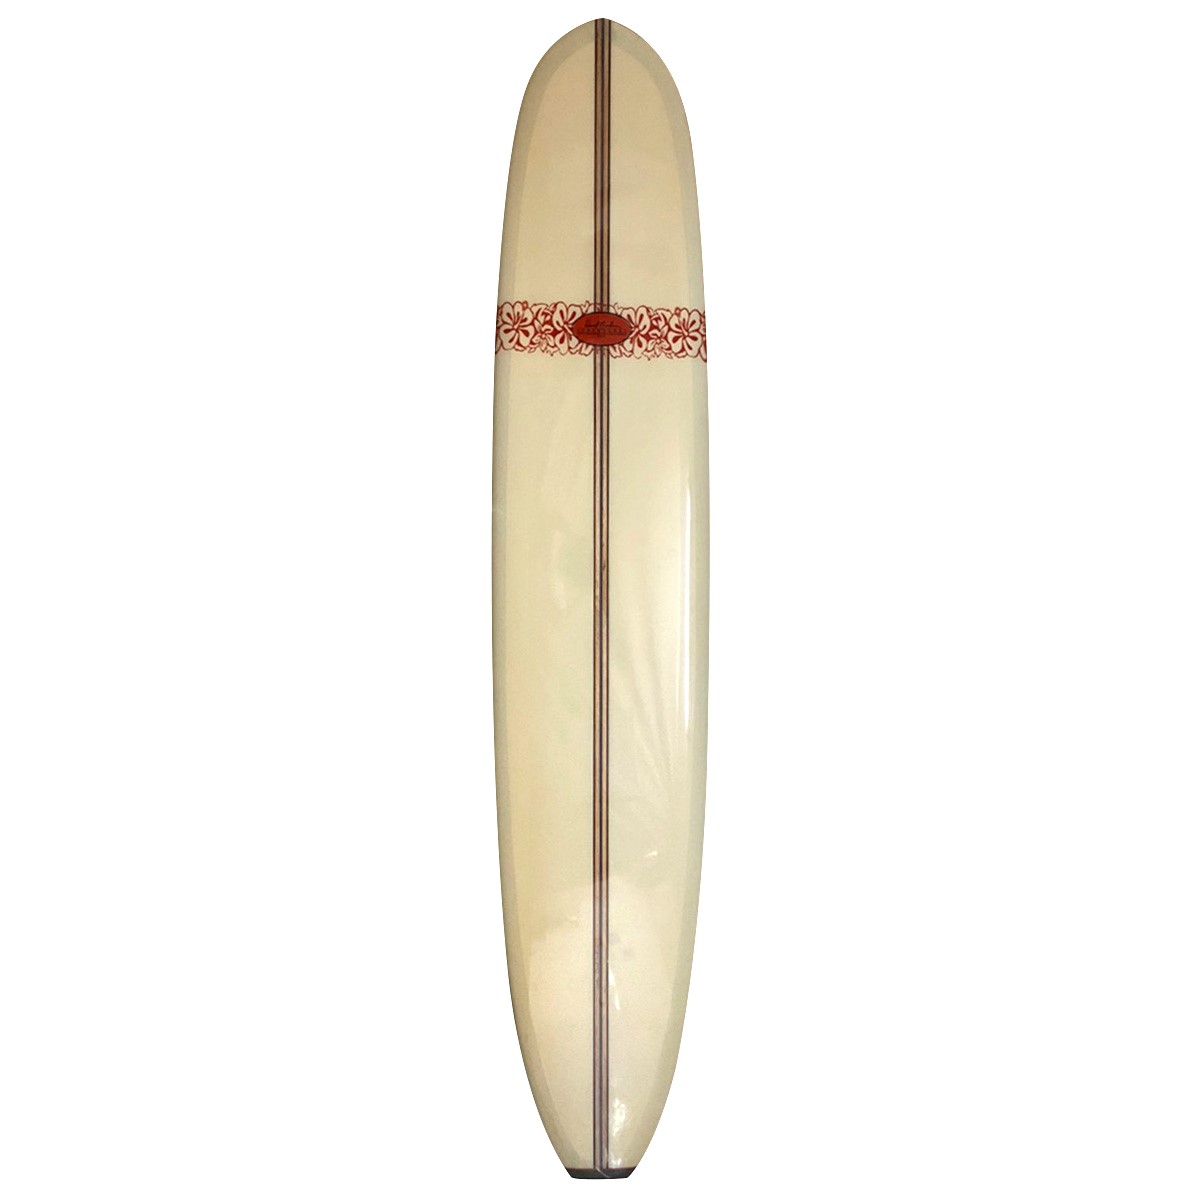 DAVID NUUHIWA SURFBOARDS / DAVID NUUHIWA SURFBOARDS / NOSERIDER 9`8 Shaped by Jim Phillips